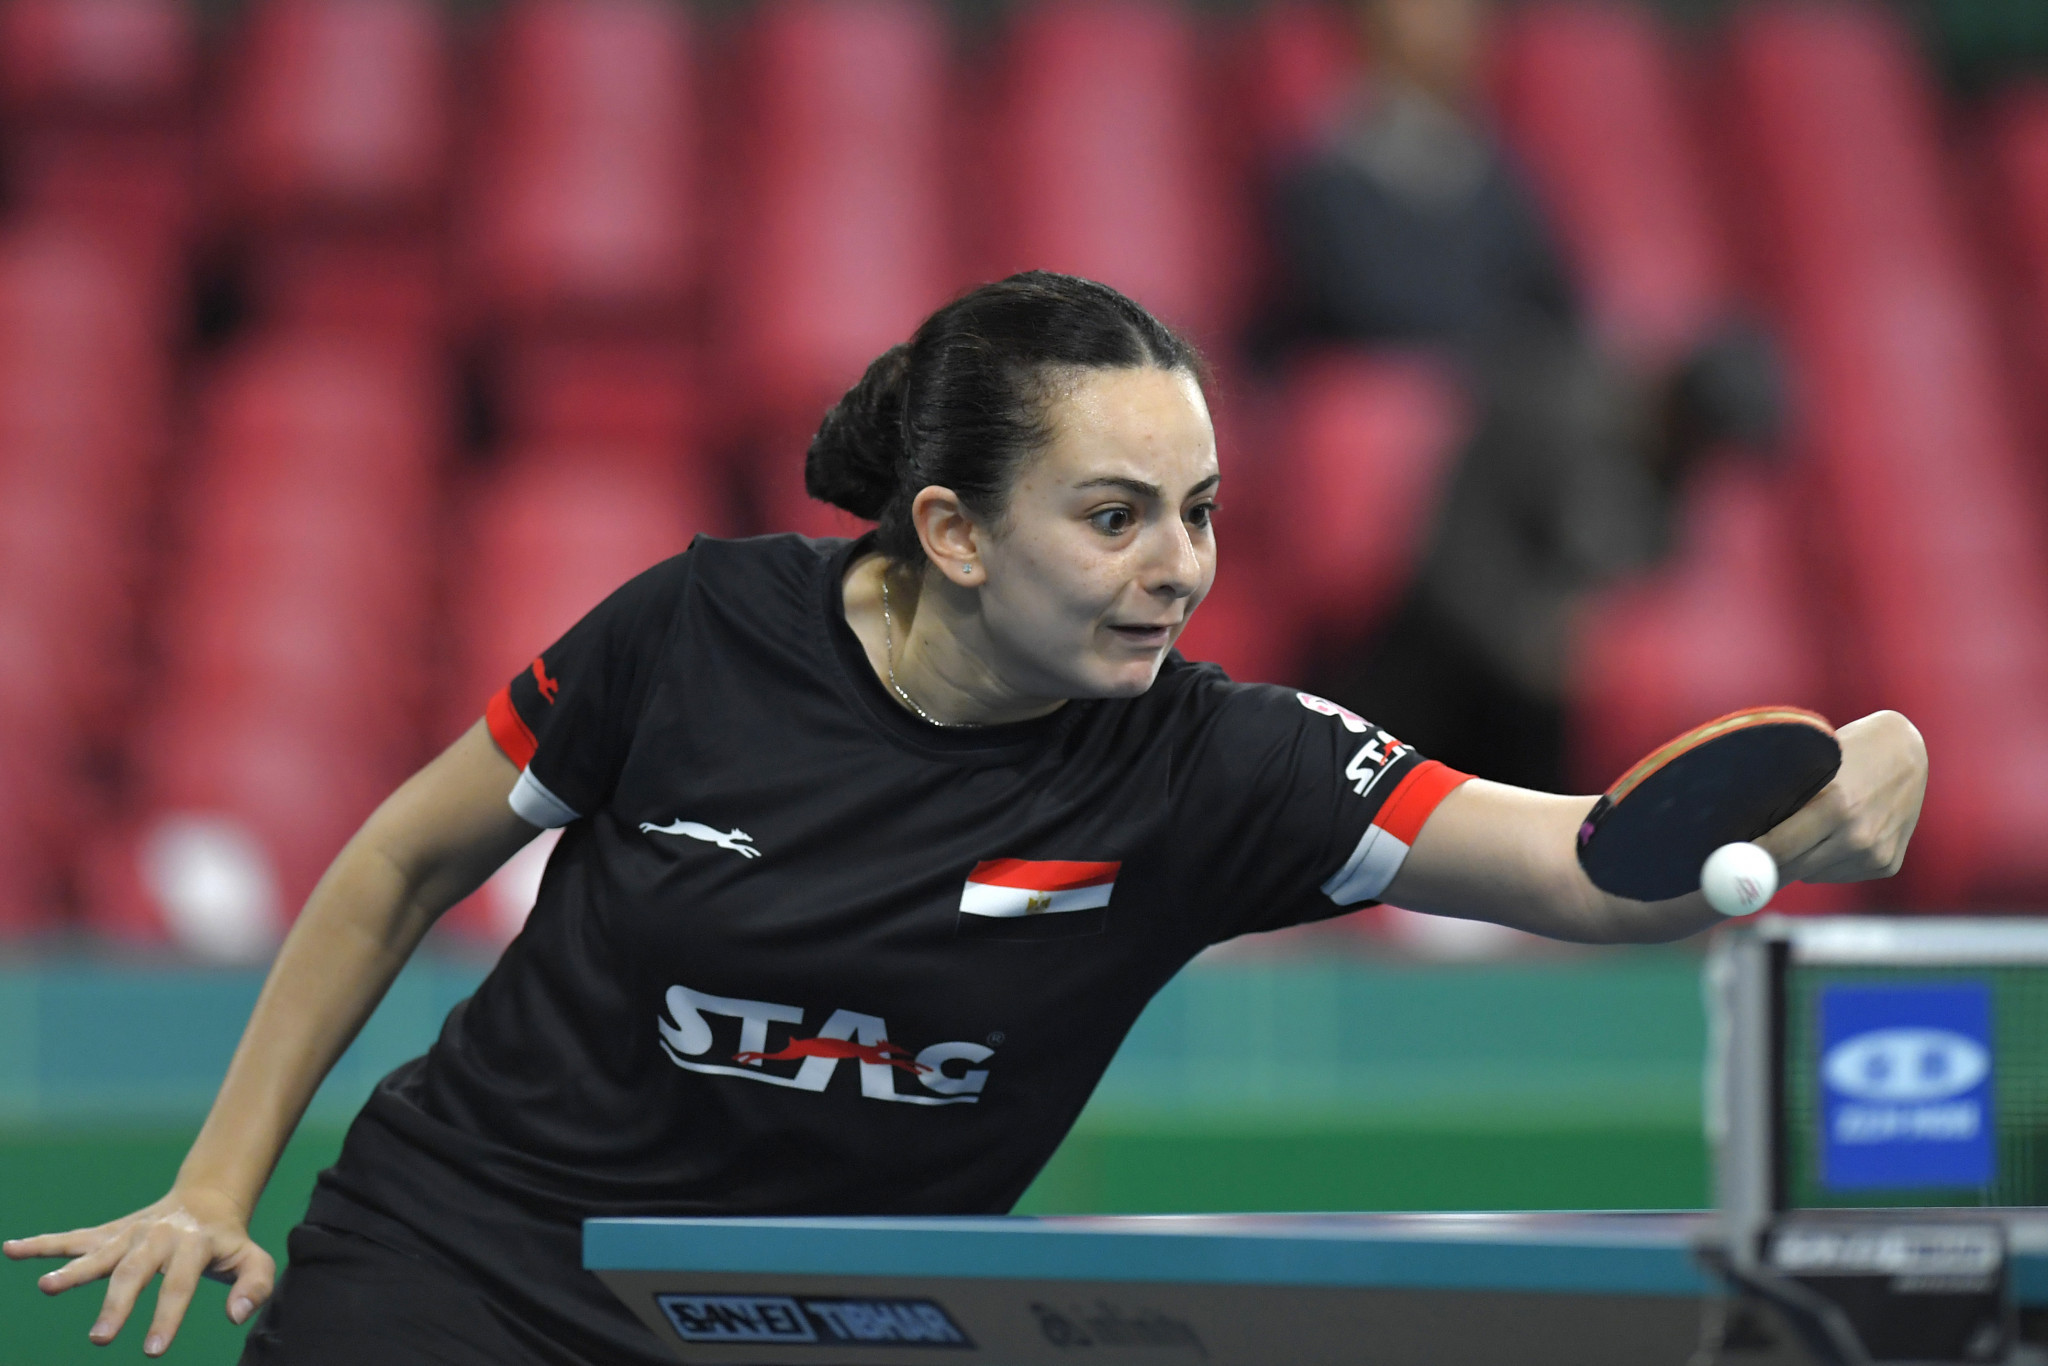 The African Table Tennis Championships will take place in 2021 ©Getty Images